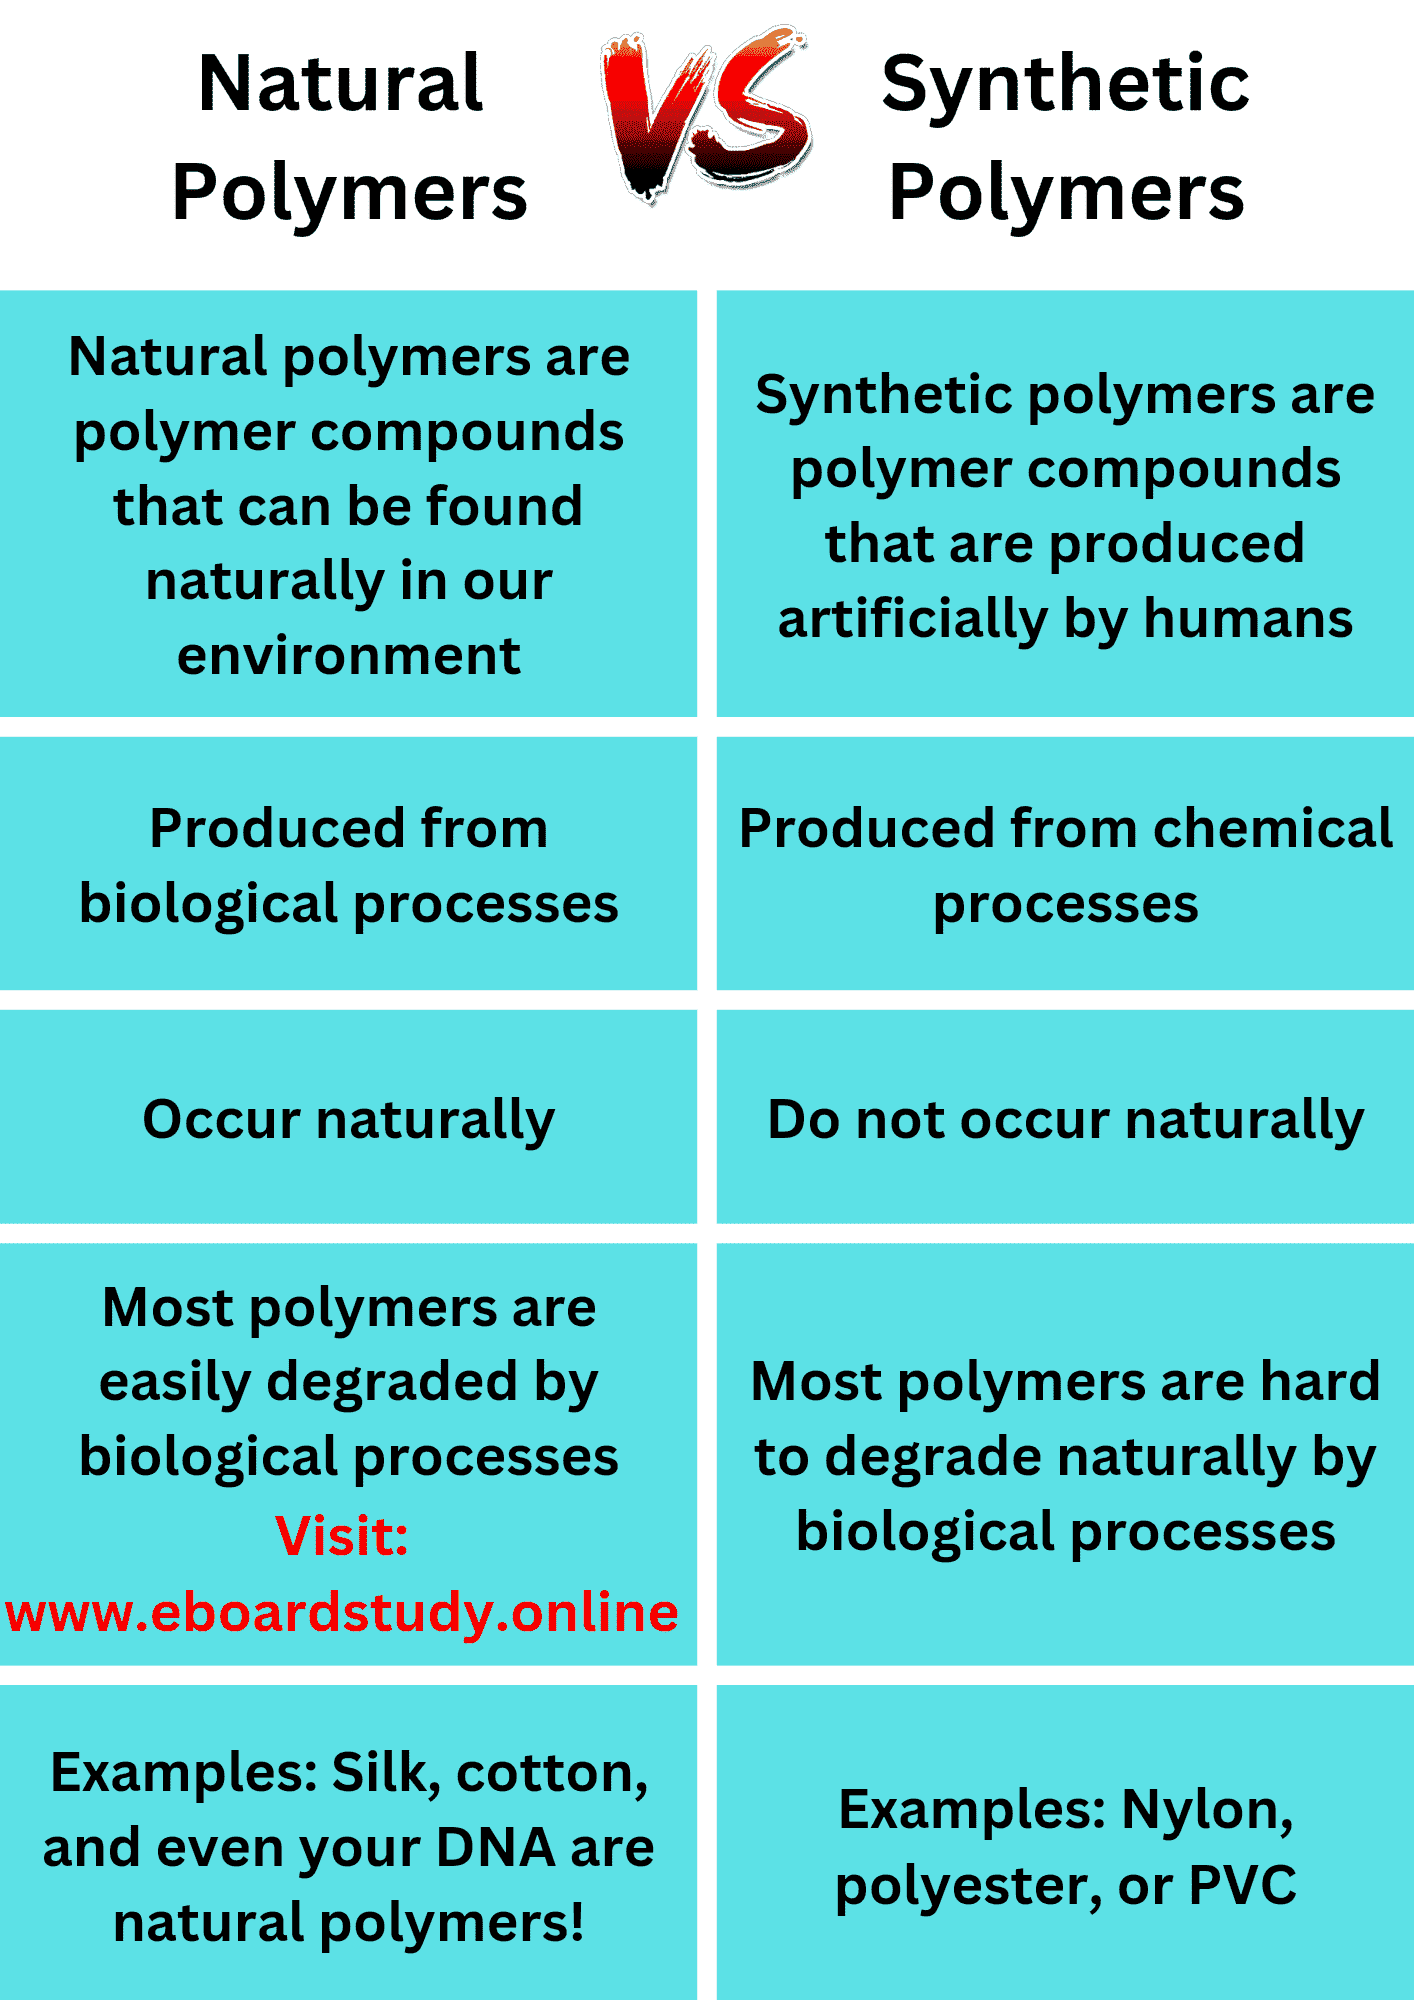 Table comparing the differences between natural and synthetic polymers